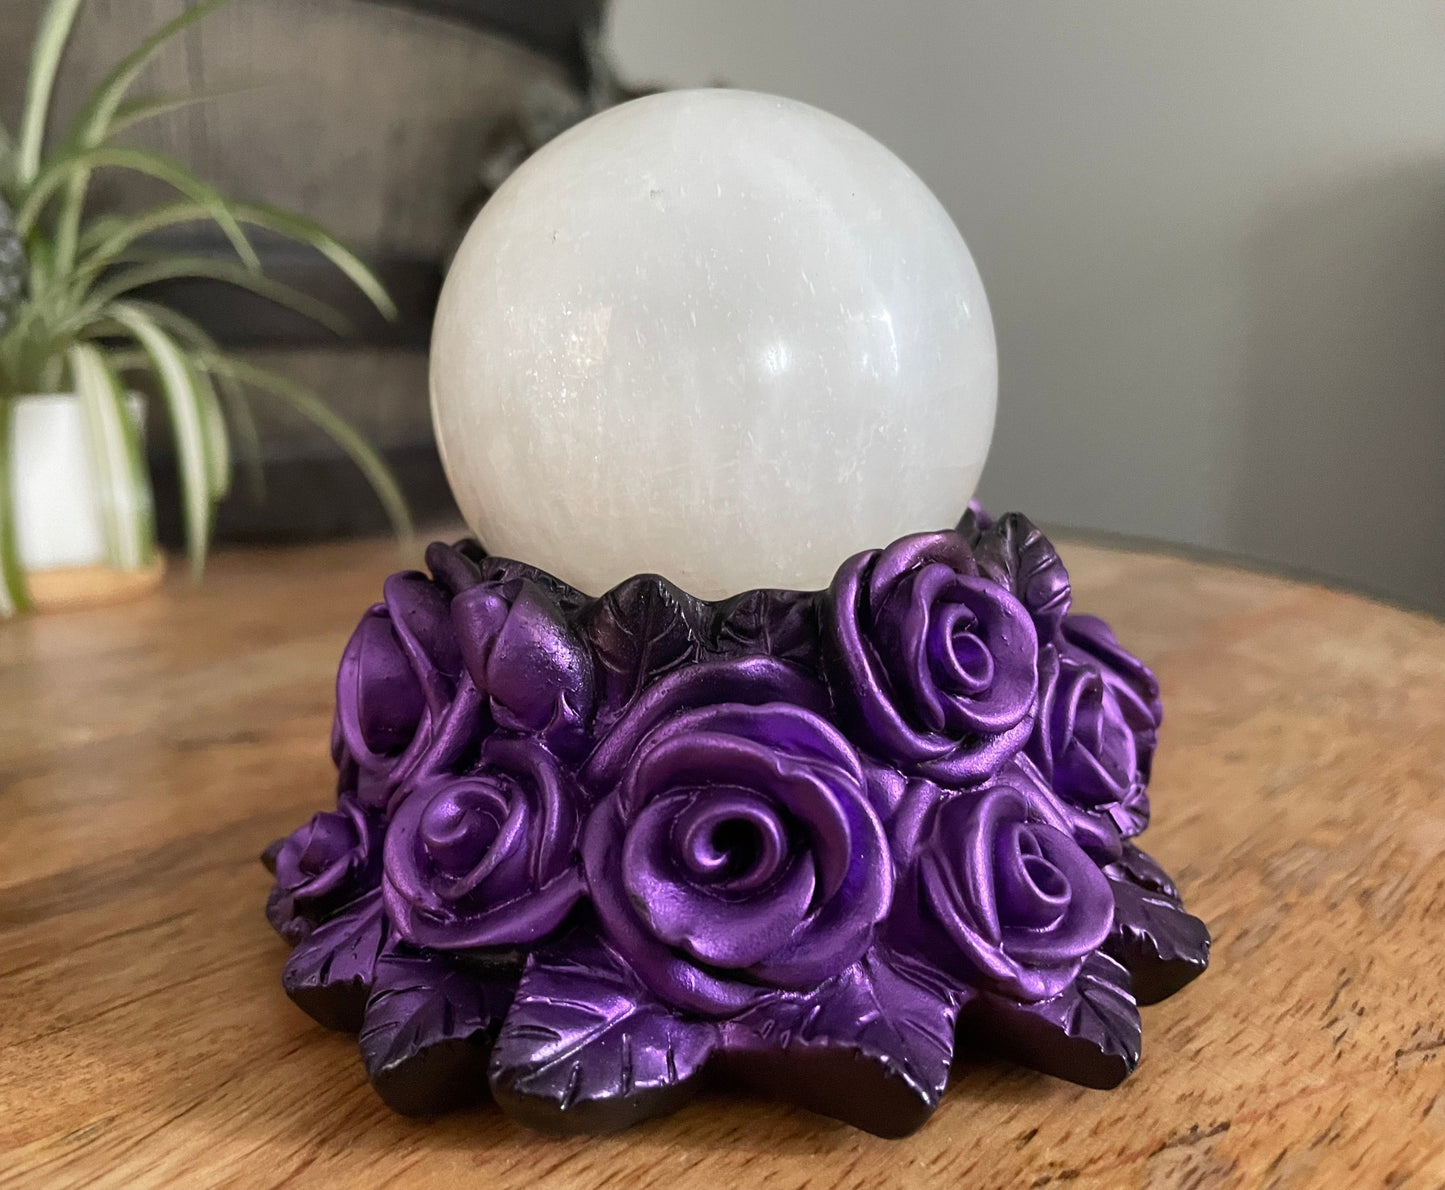 Pictured is a sphere stand in the shape of a bed of purple roses.